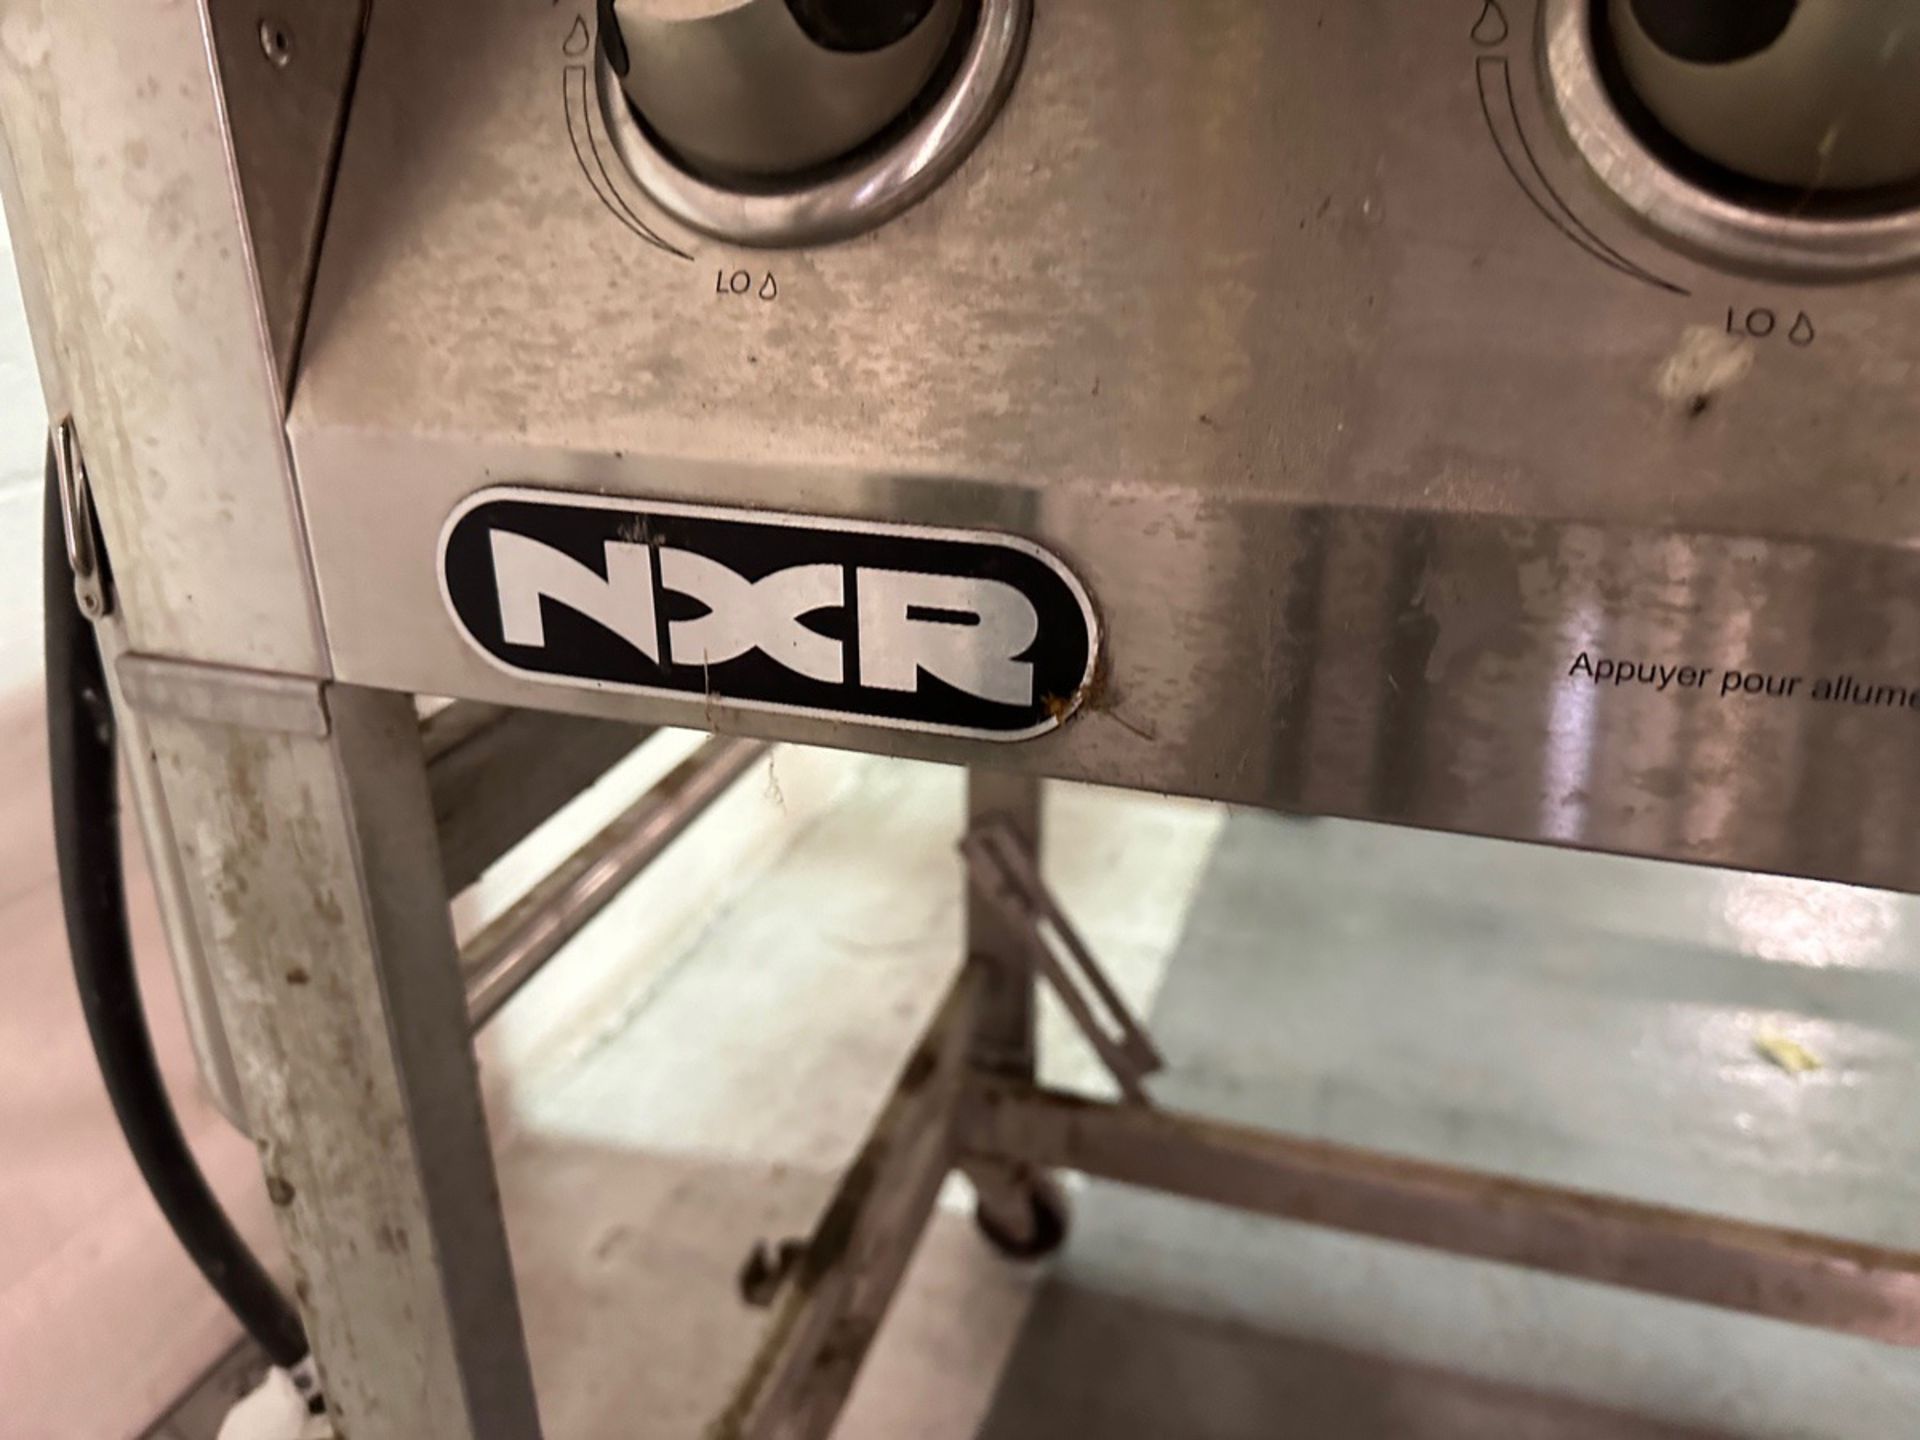 NXR Propane Outdoor Grill - Model 780-0838 - Image 2 of 4